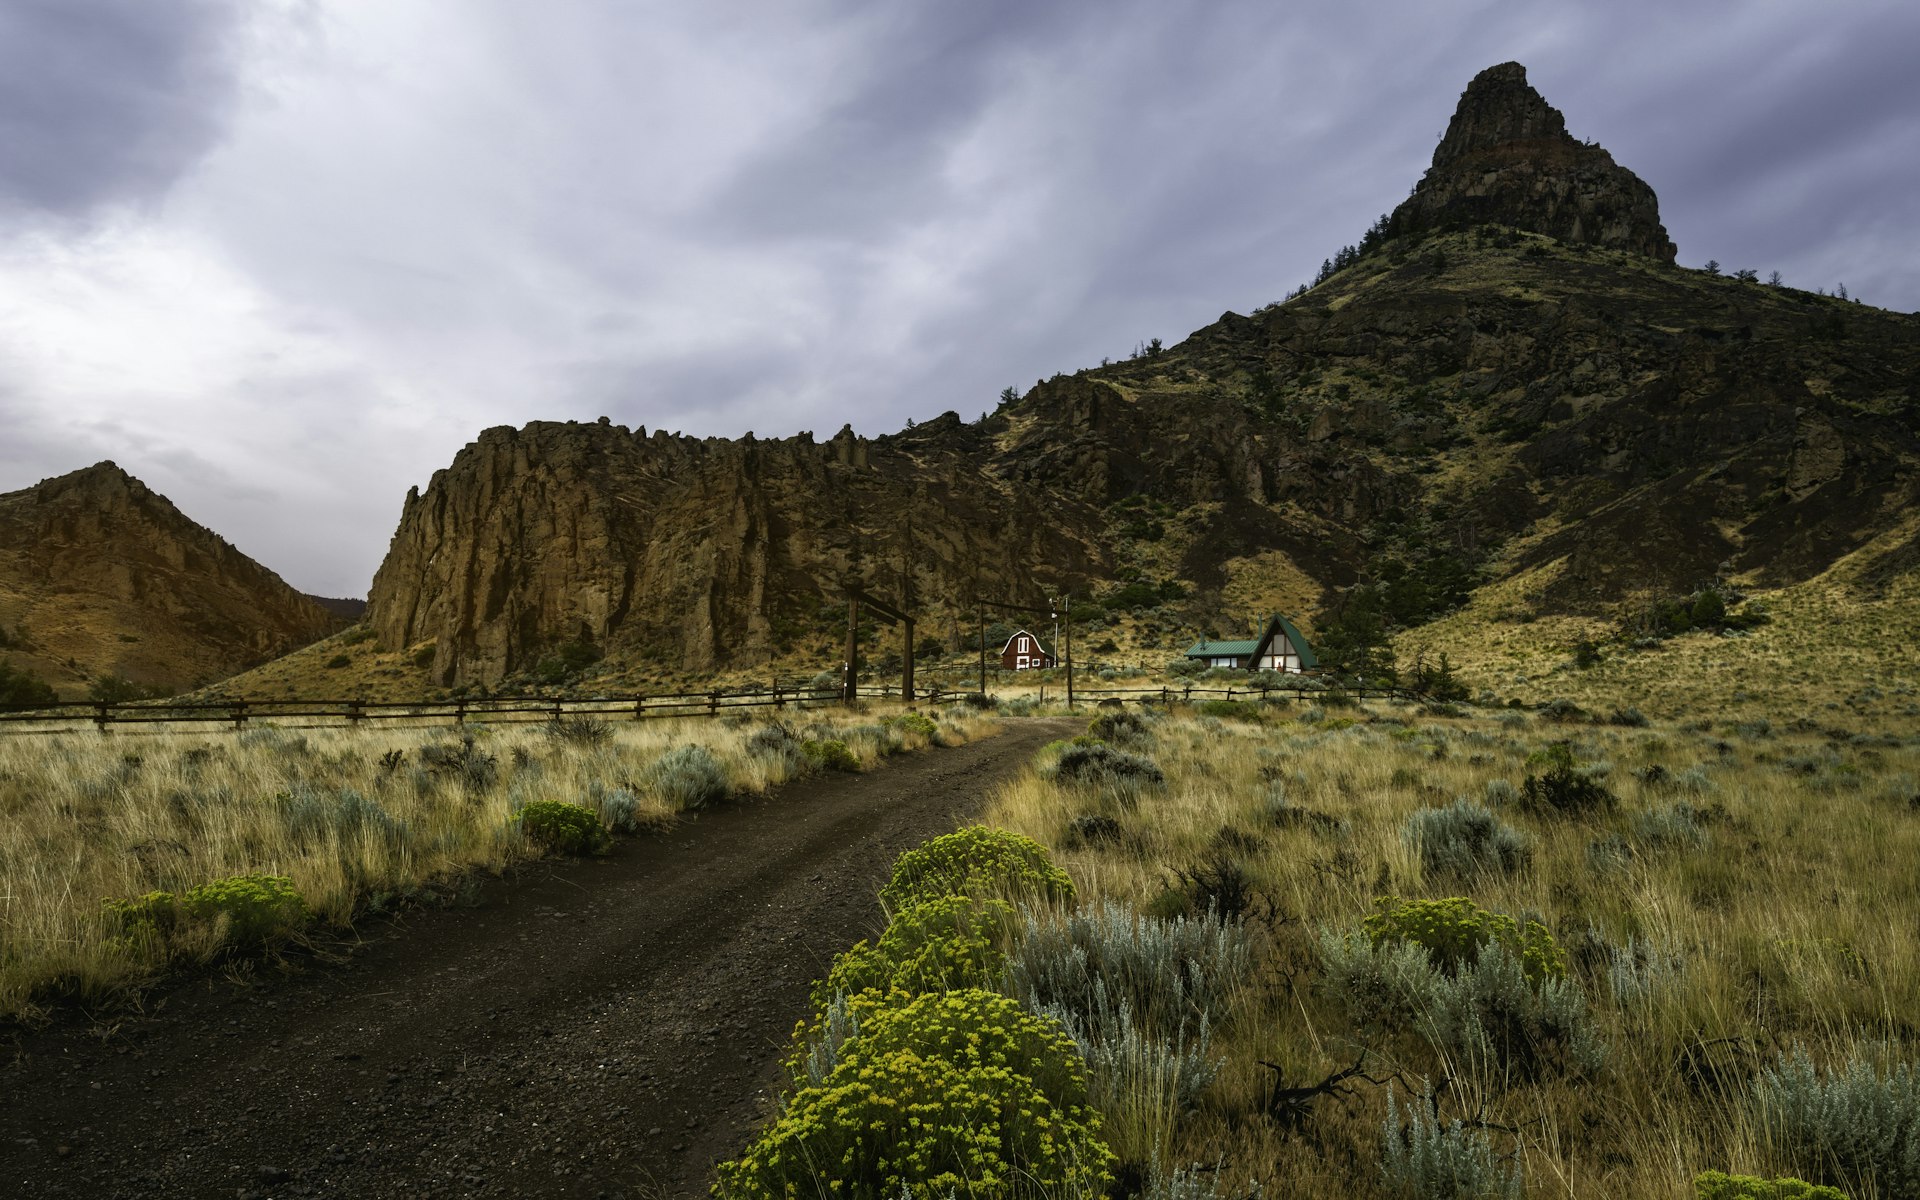 Homestead surrounded by rugged landscape, Cody, Wyoming, USA.